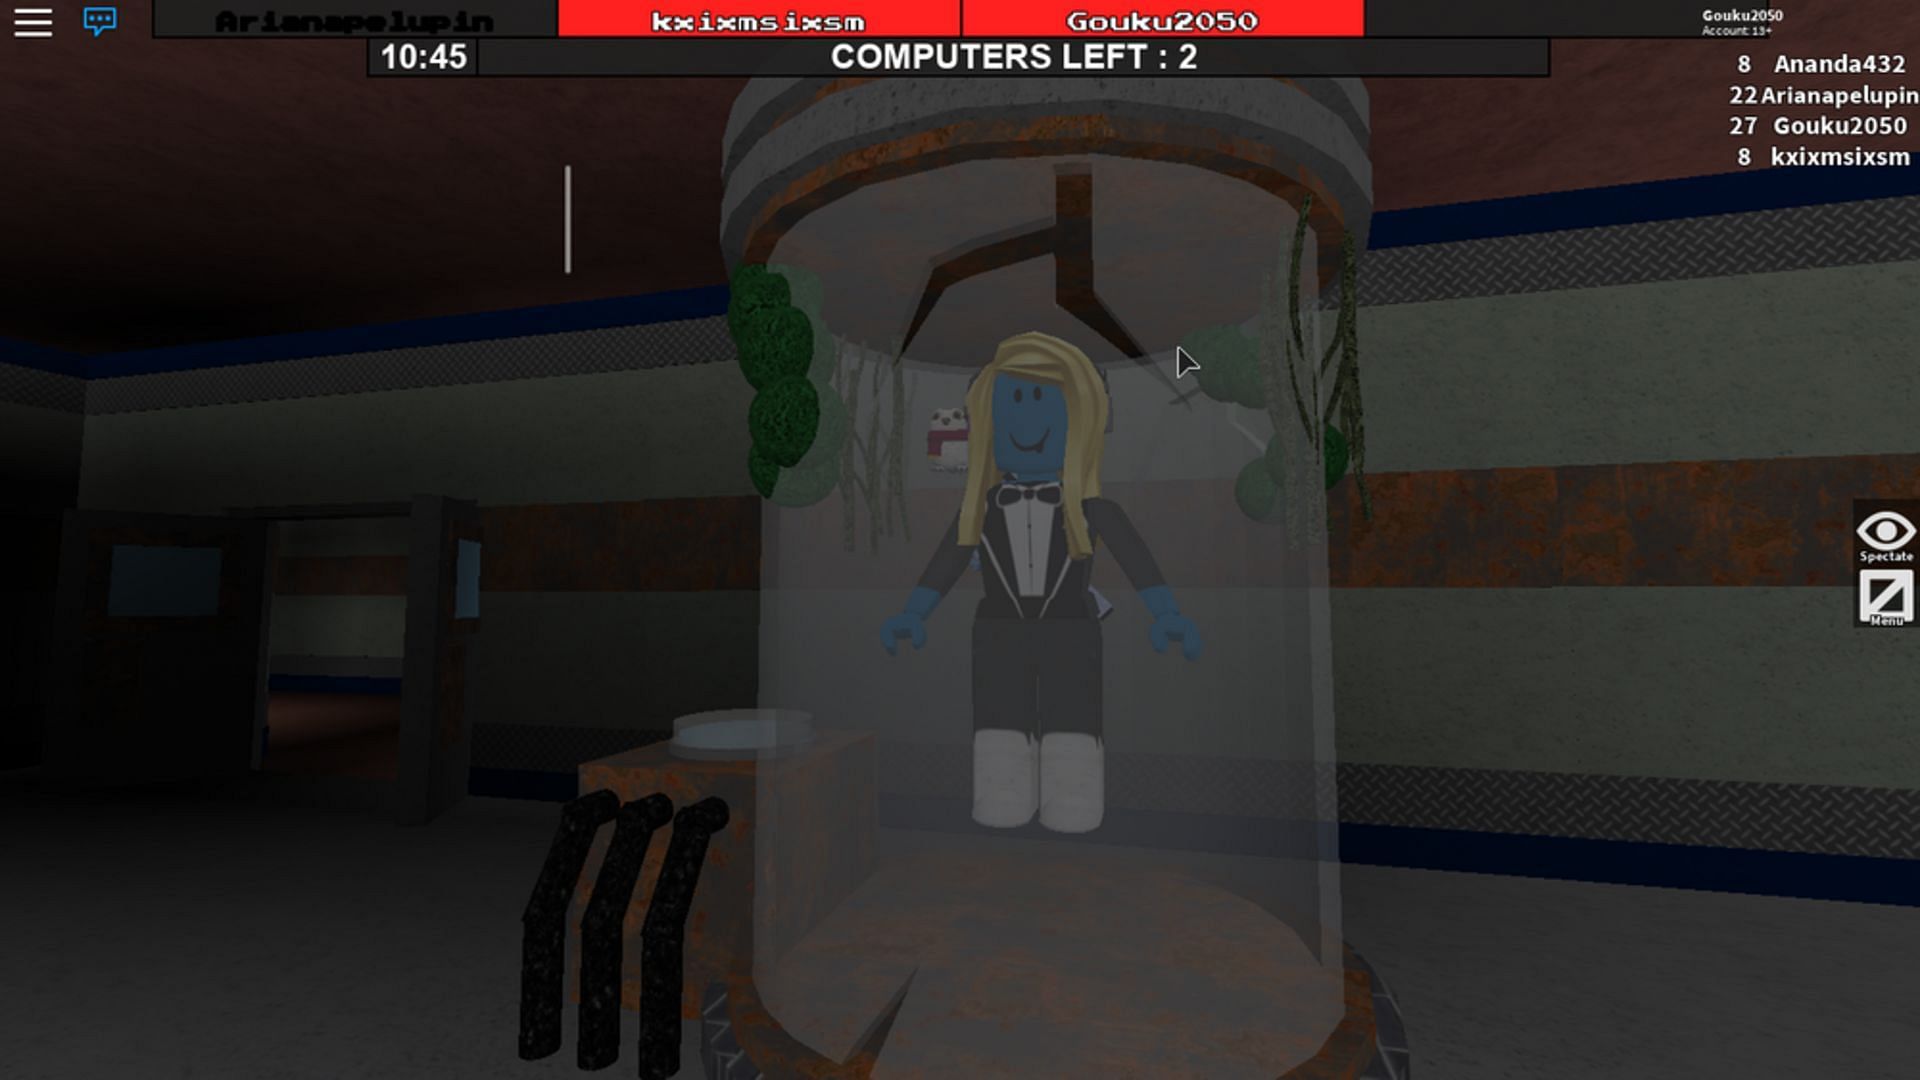 Roblox - END OF LINE FOR YOU! (Flee The Facility) 